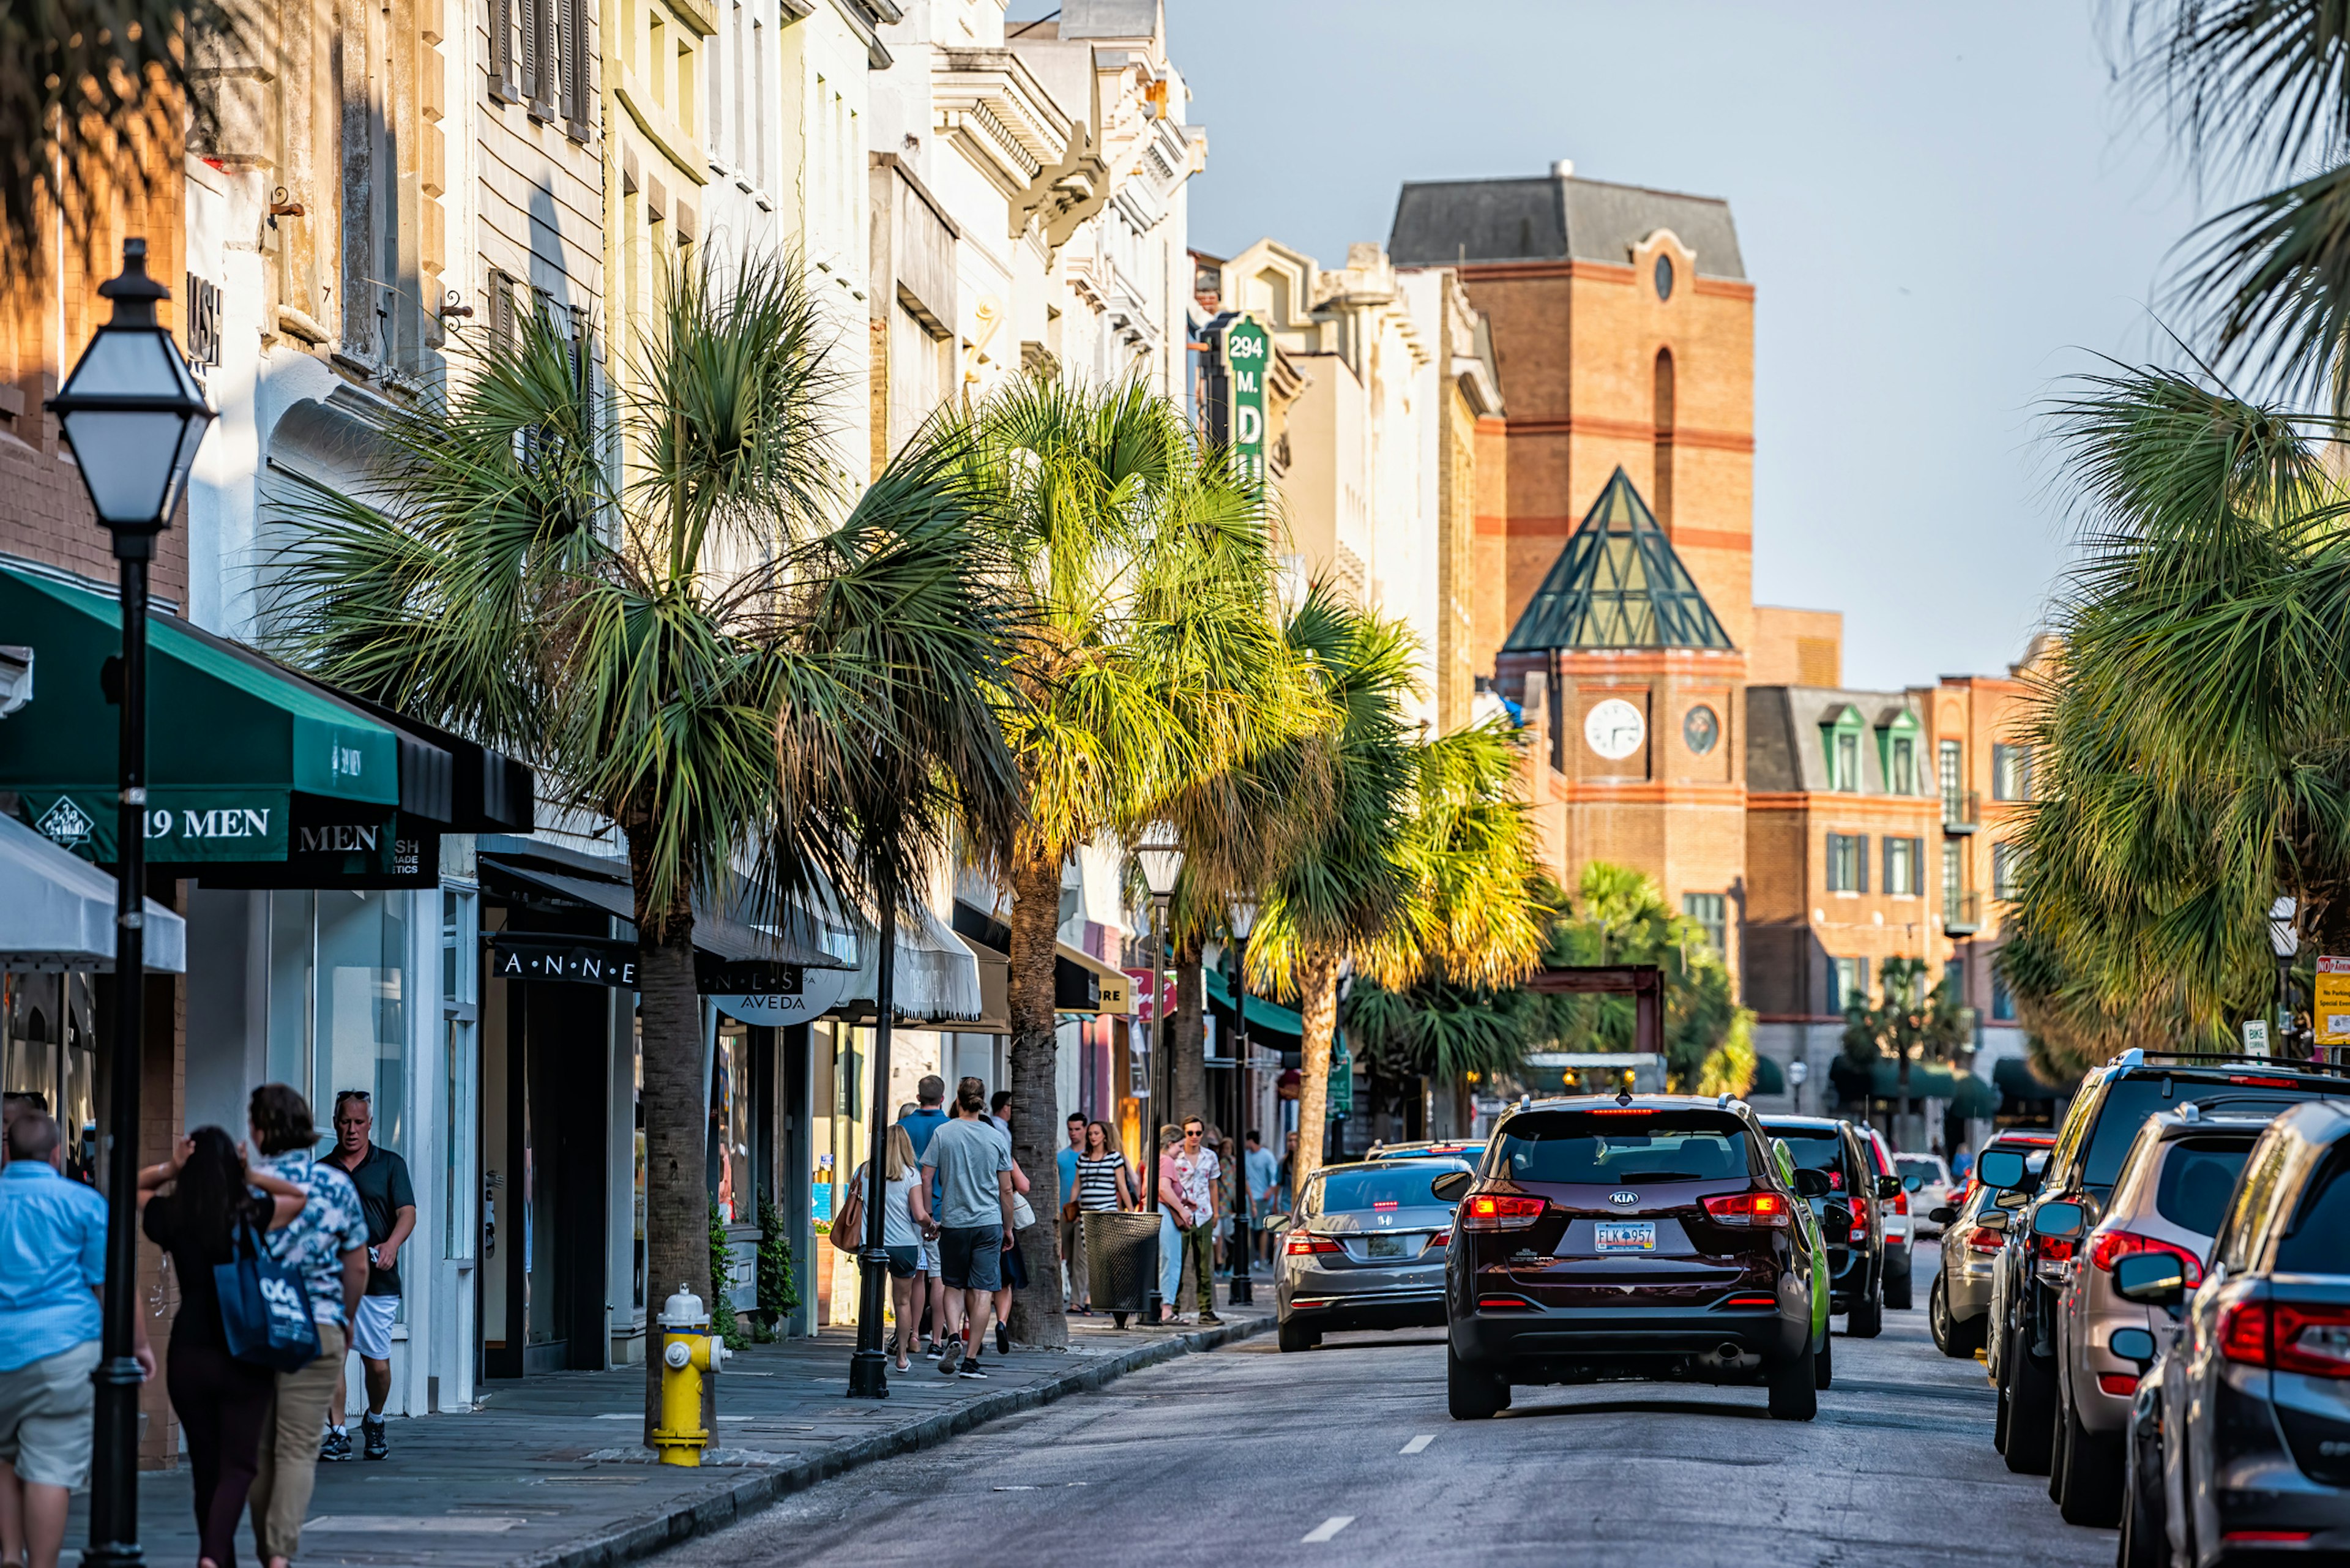 Charleston, USA - May 12, 2018: Downtown district in city with King street in South Carolina with cars and people in southern town shopping and view of Belmond Place hotel